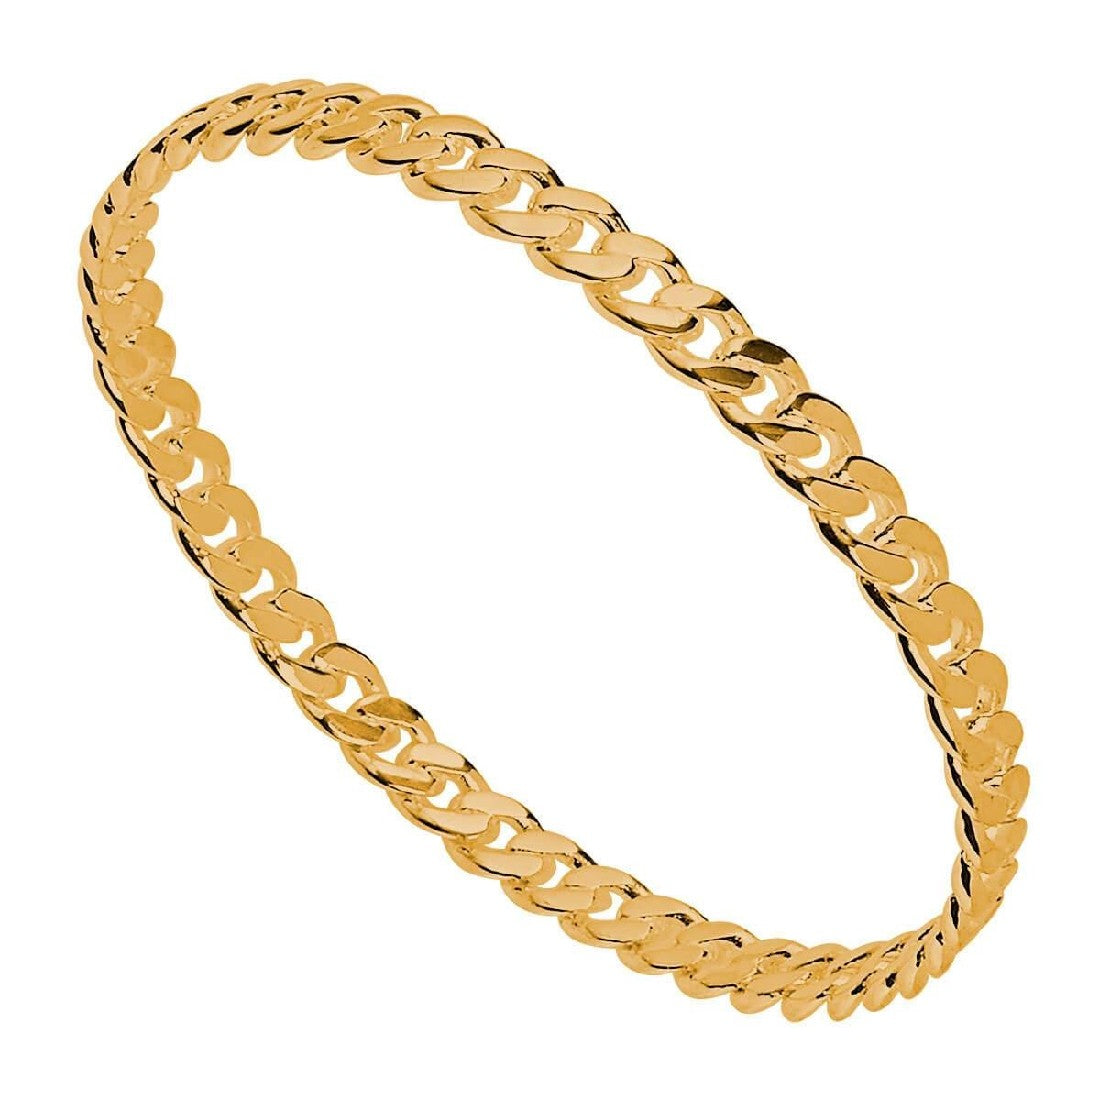 NAJO CURB LINK BANGLE 67MM GOLD PLATED